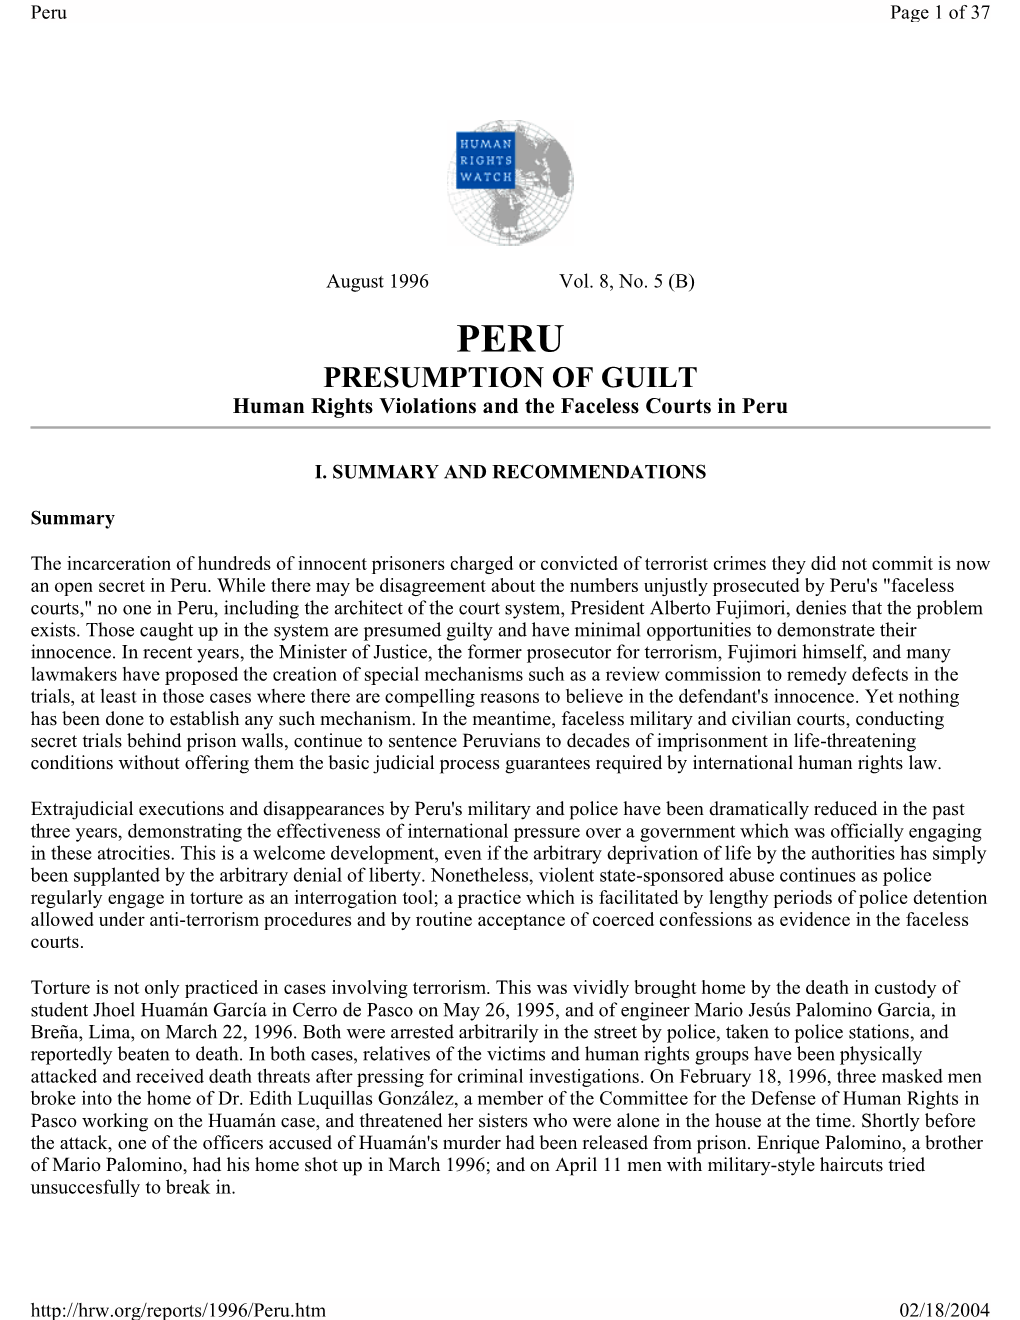 PRESUMPTION of GUILT Human Rights Violations and the Faceless Courts in Peru